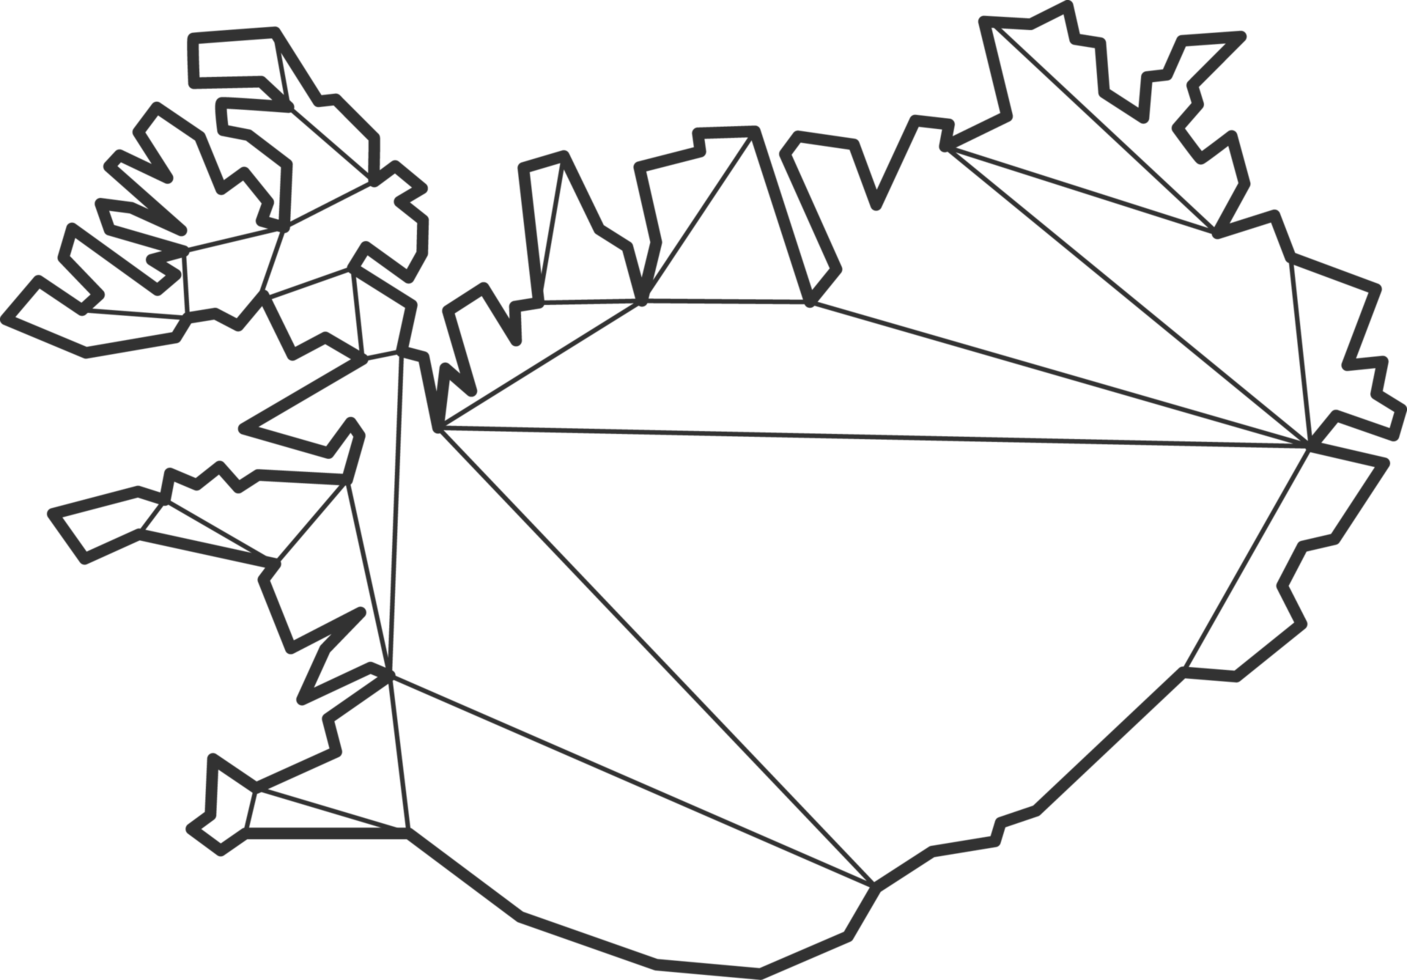 Mosaic triangles map style of Iceland. png